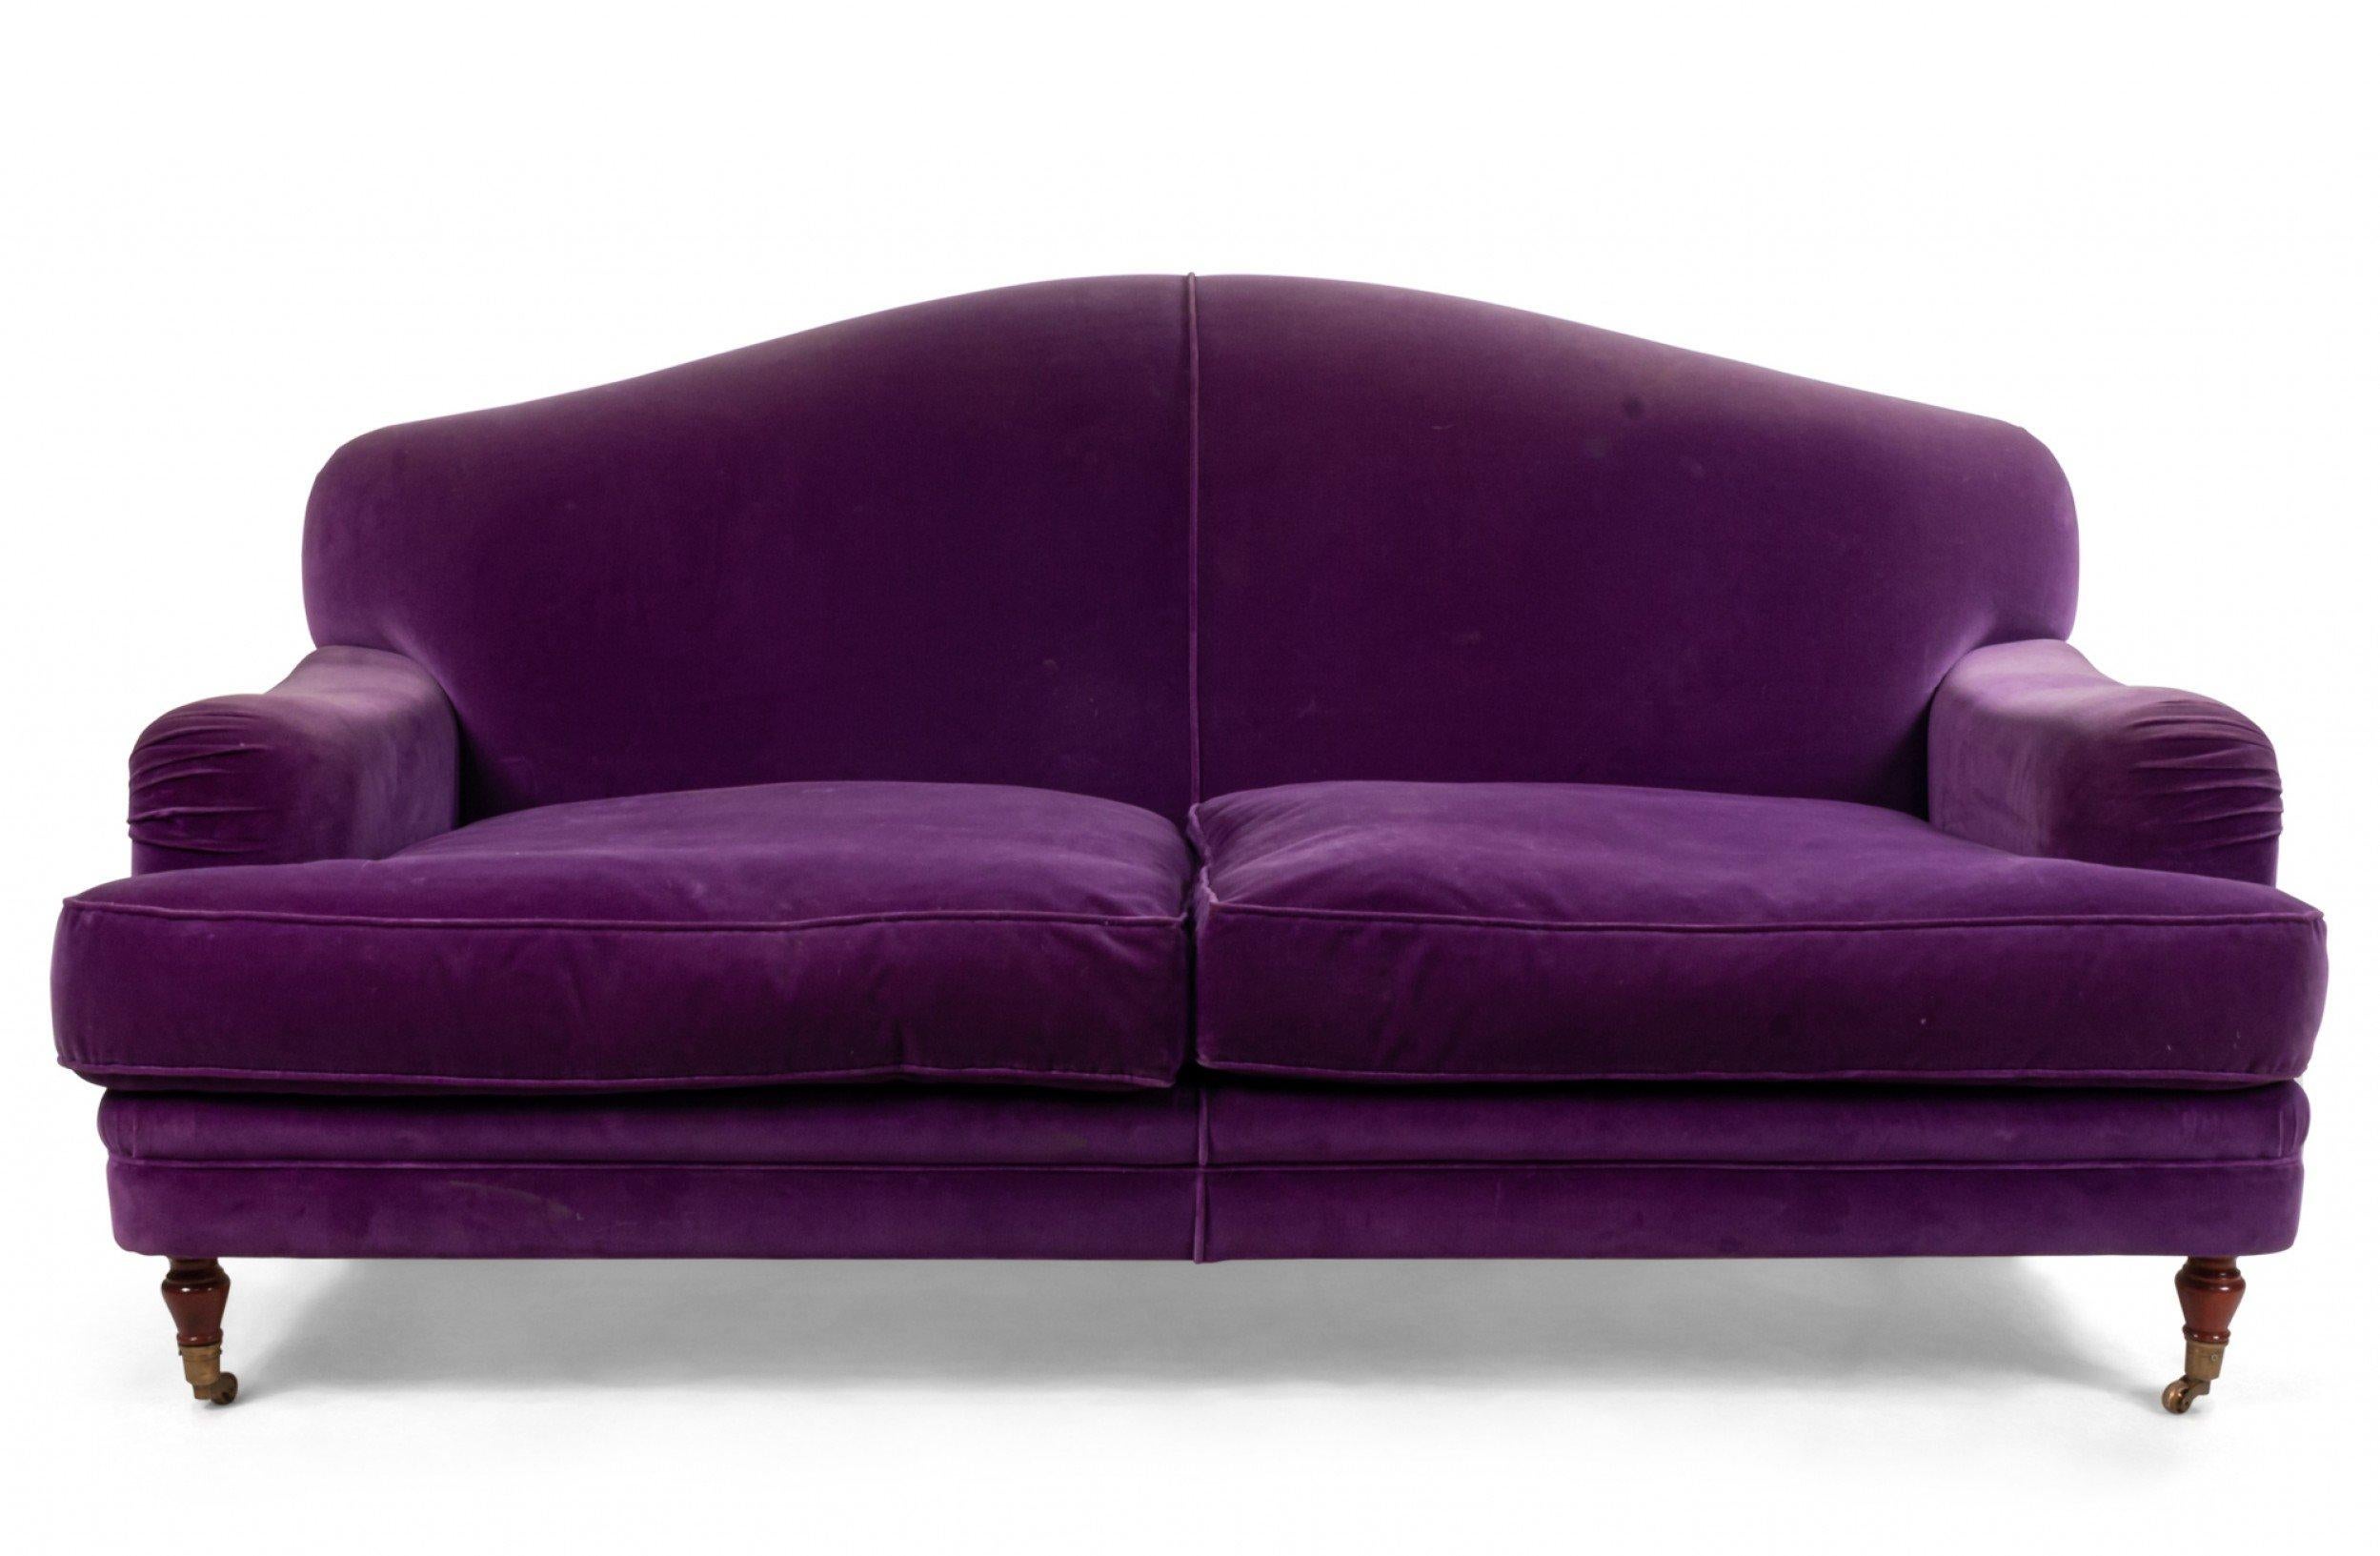 English Victorian style (modern) purple velvet loveseat with turned mahogany legs and 2 seat cushion, 2 red pillows, and 1 blue pillow.
     